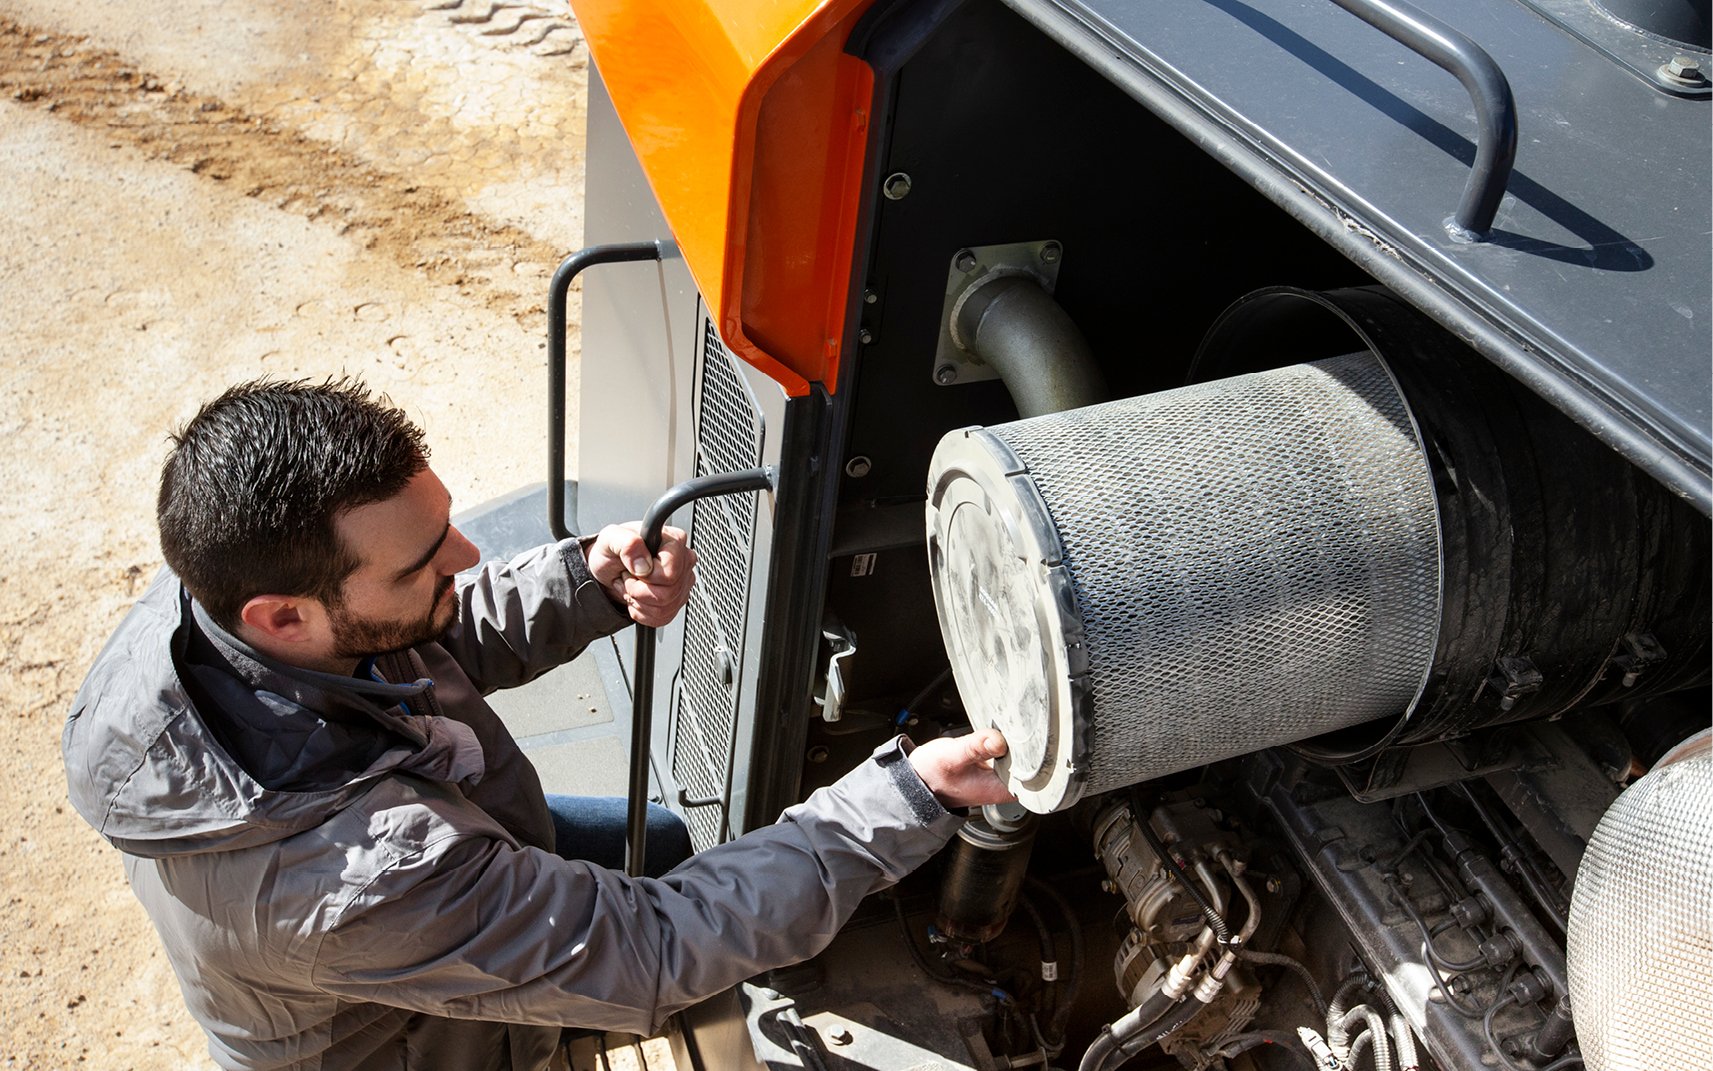 A heavy equipment operator performs preventive maintenance by removing a filter.